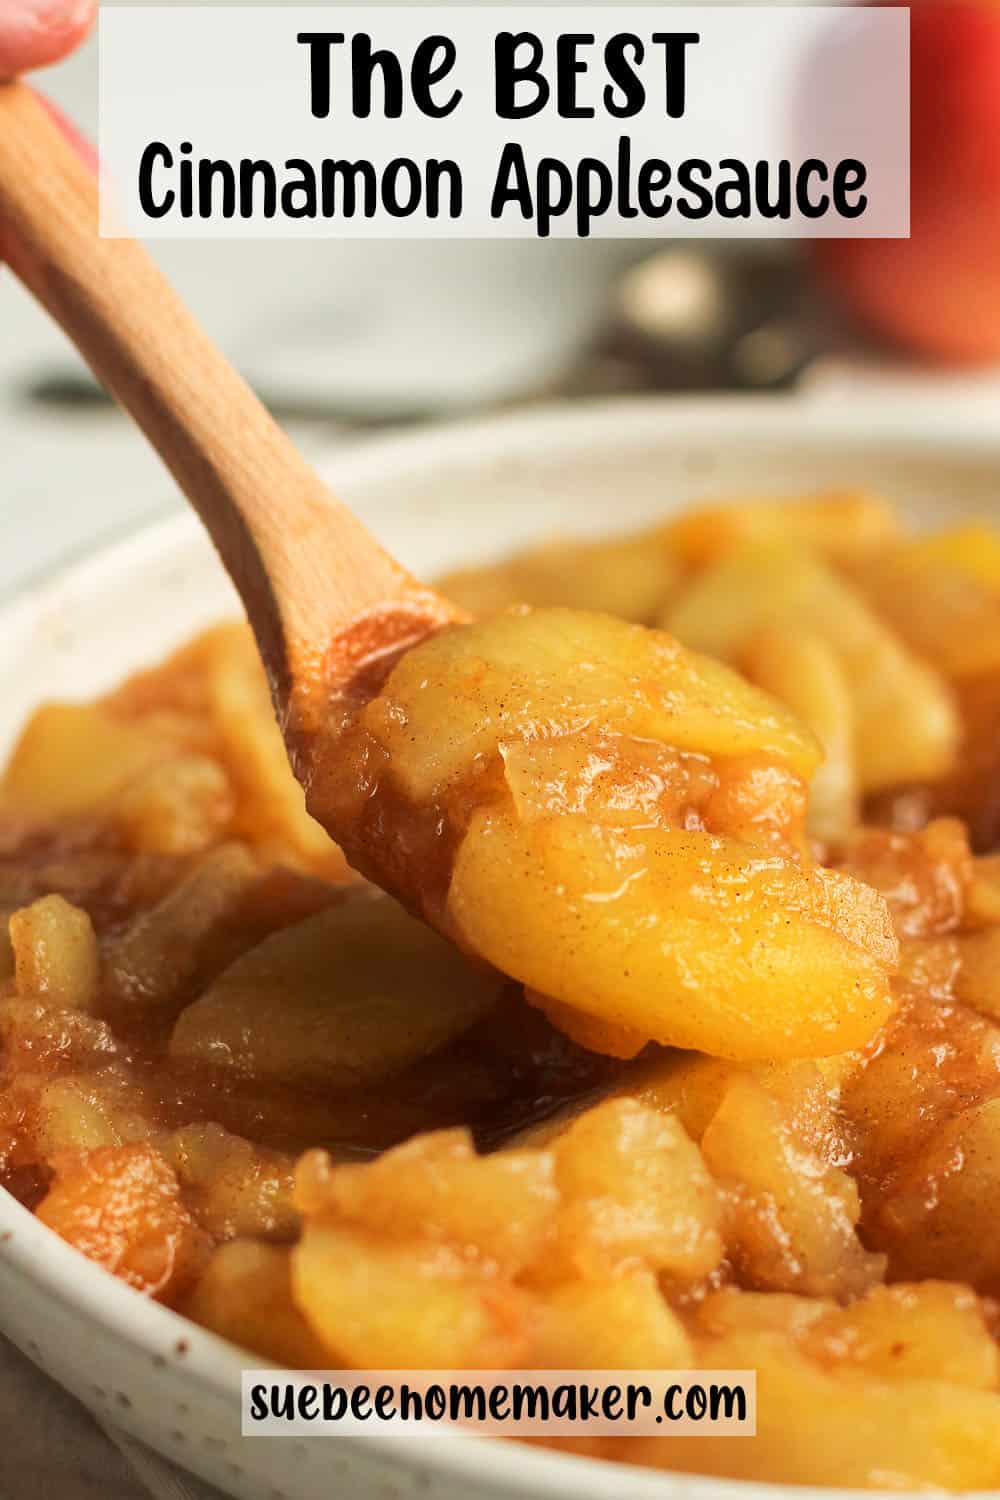 A spoonful of the best cinnamon applesauce out of a bowl.